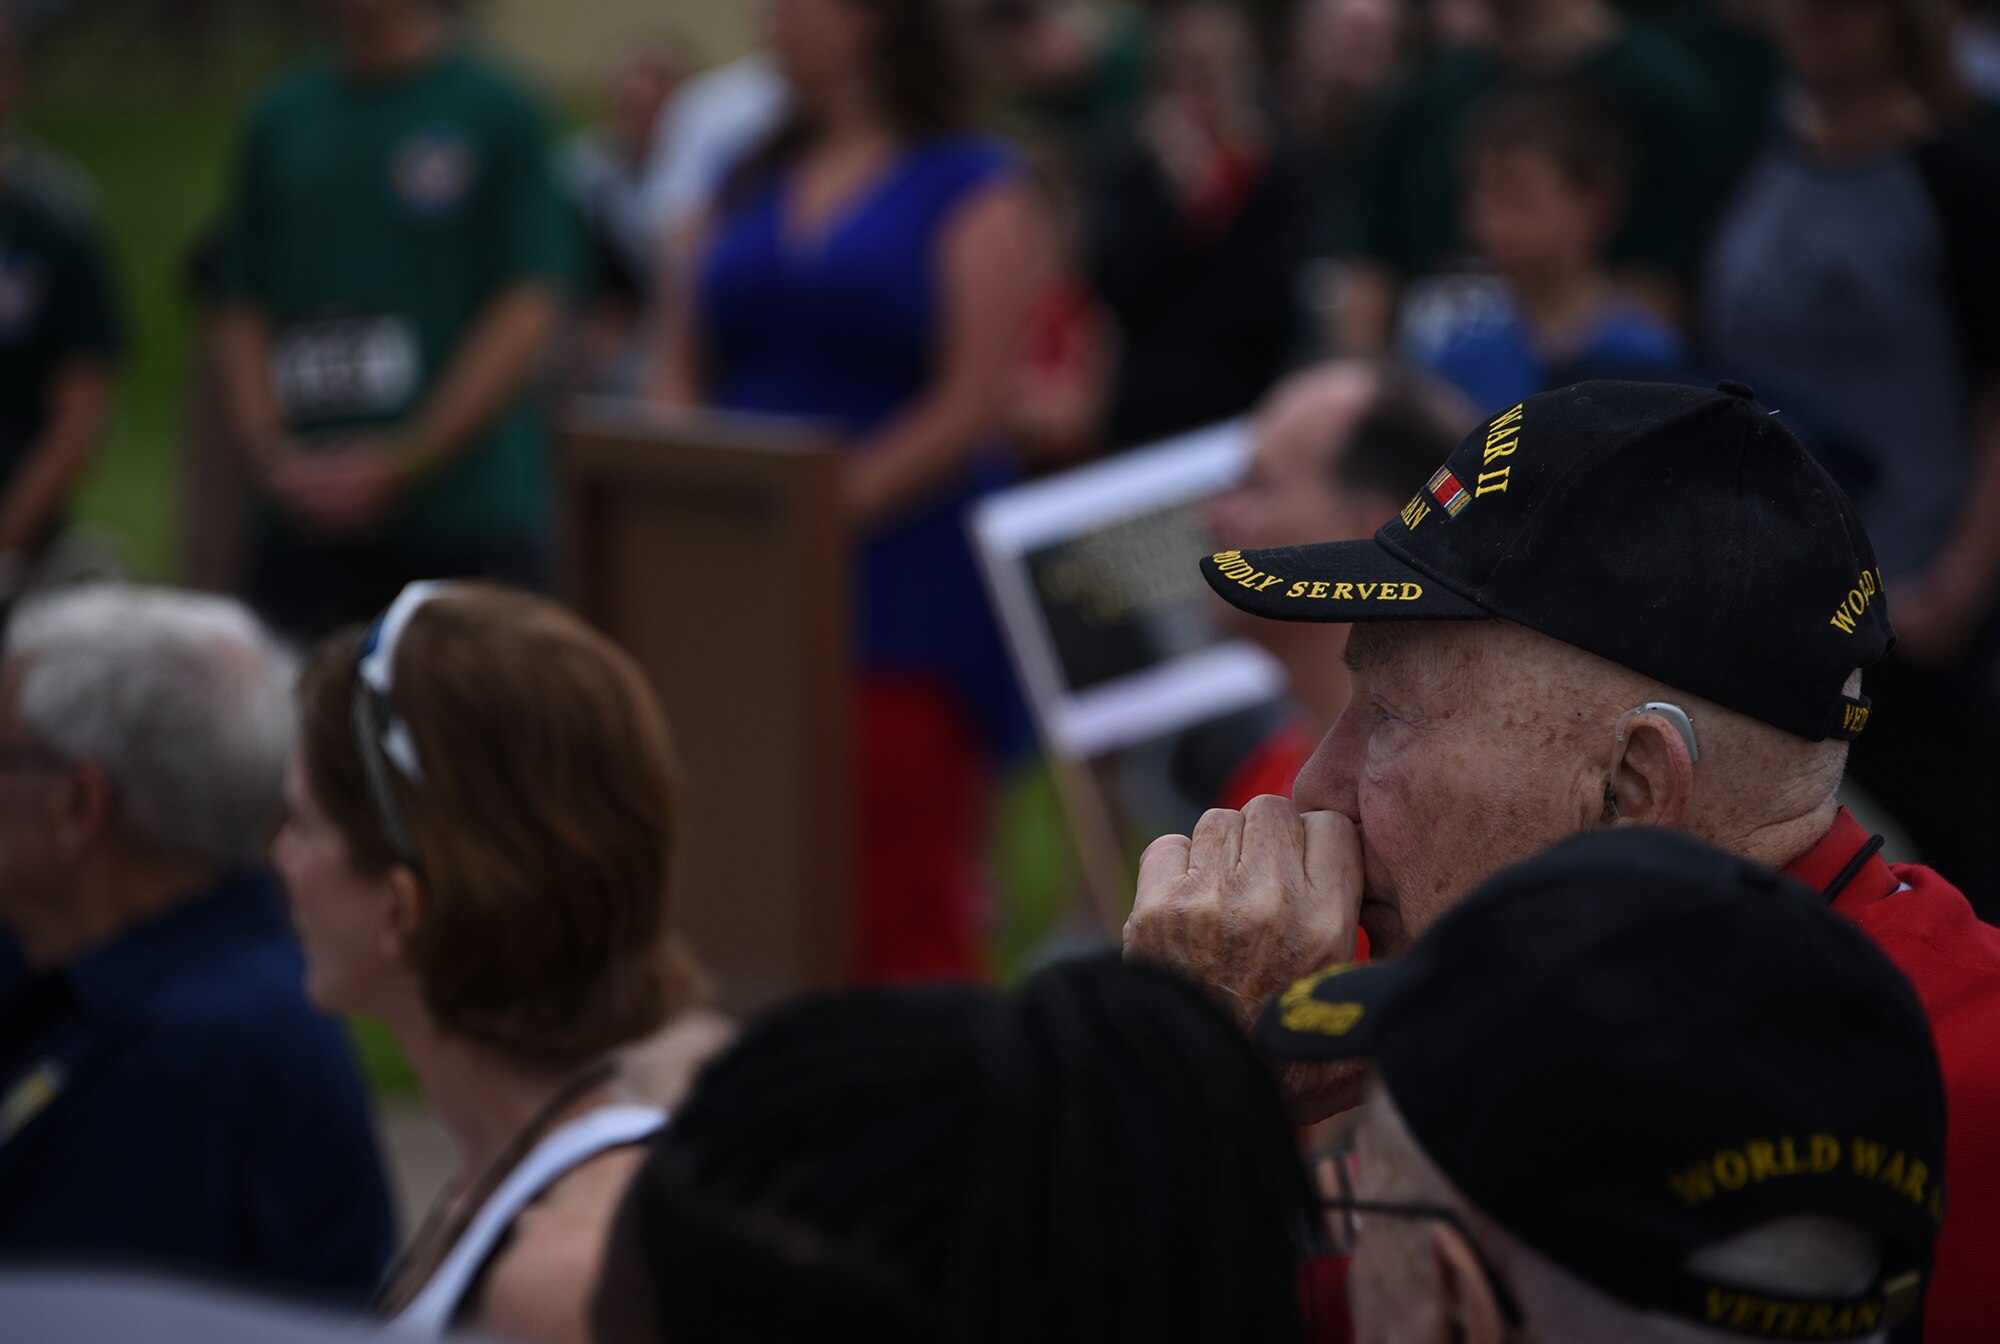 Retired Col. Steven dePyssler, Eighth Air Force World War II veteran, listens to remarks during the Mighty Eighth Heritage 8K event’s opening ceremony at Barksdale Air Force Base, La., April 26, 2017. Approximately 100 Airmen and their family members ran in honor of Eighth Air Force veterans as a way of recognizing and remembering the services and sacrifices they made for their country. The run served as one of the many events held in commemoration of the Eighth Air Force’s 75th anniversary. (U.S. Air Force photo by Senior Airman Erin Trower) 